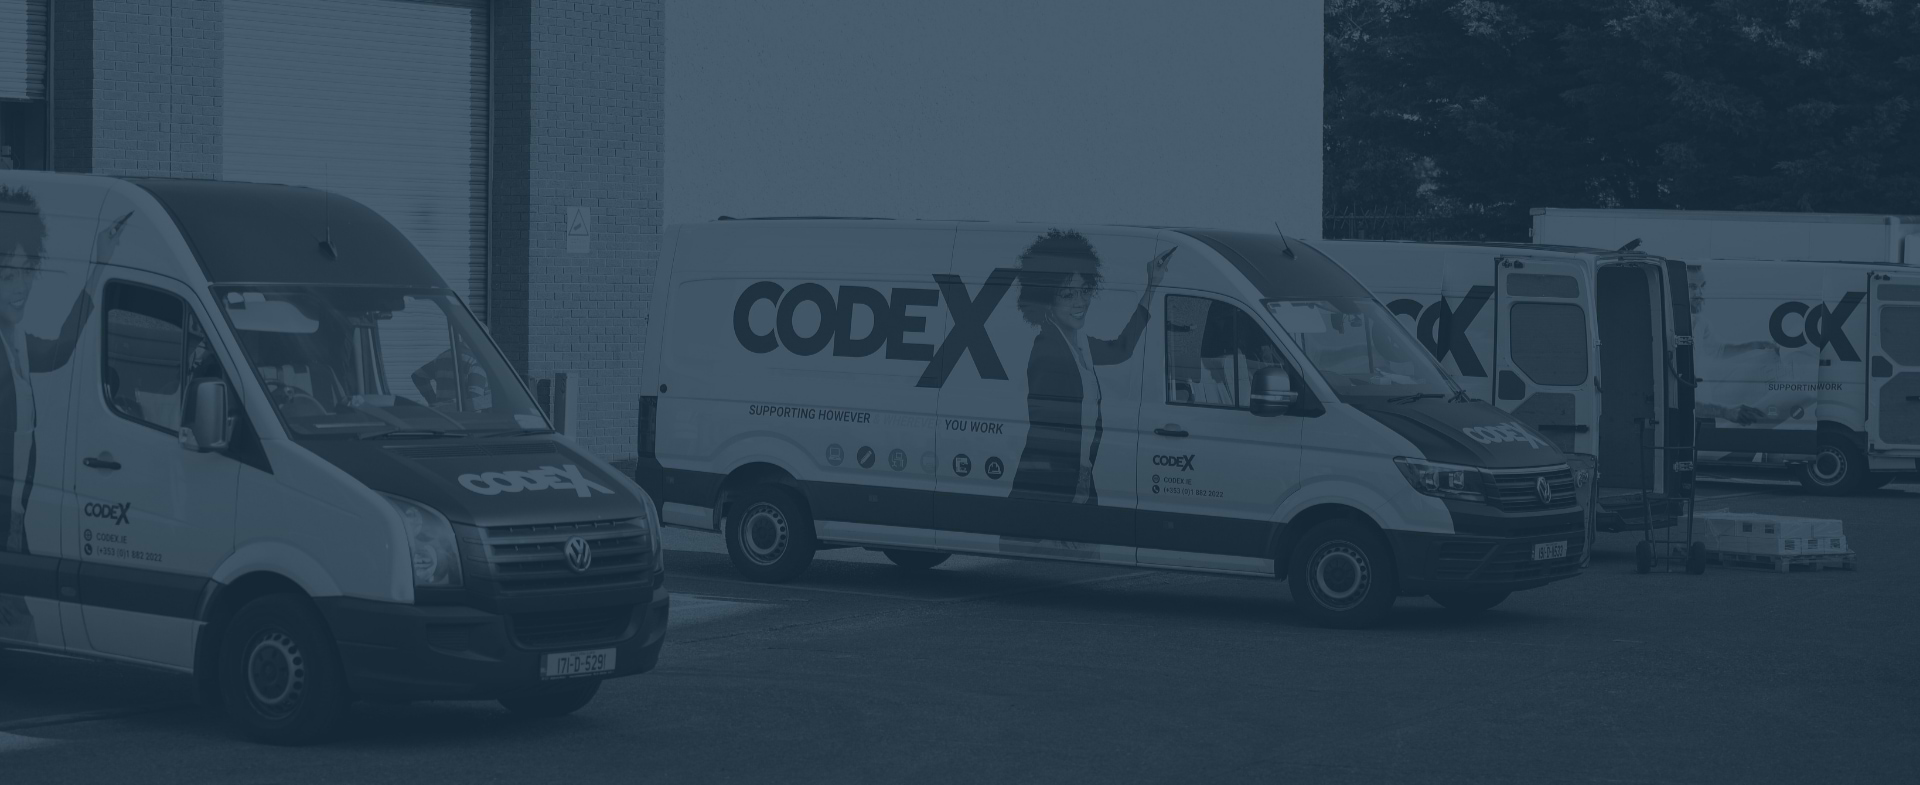 codex-delivery-van-outside-office-building